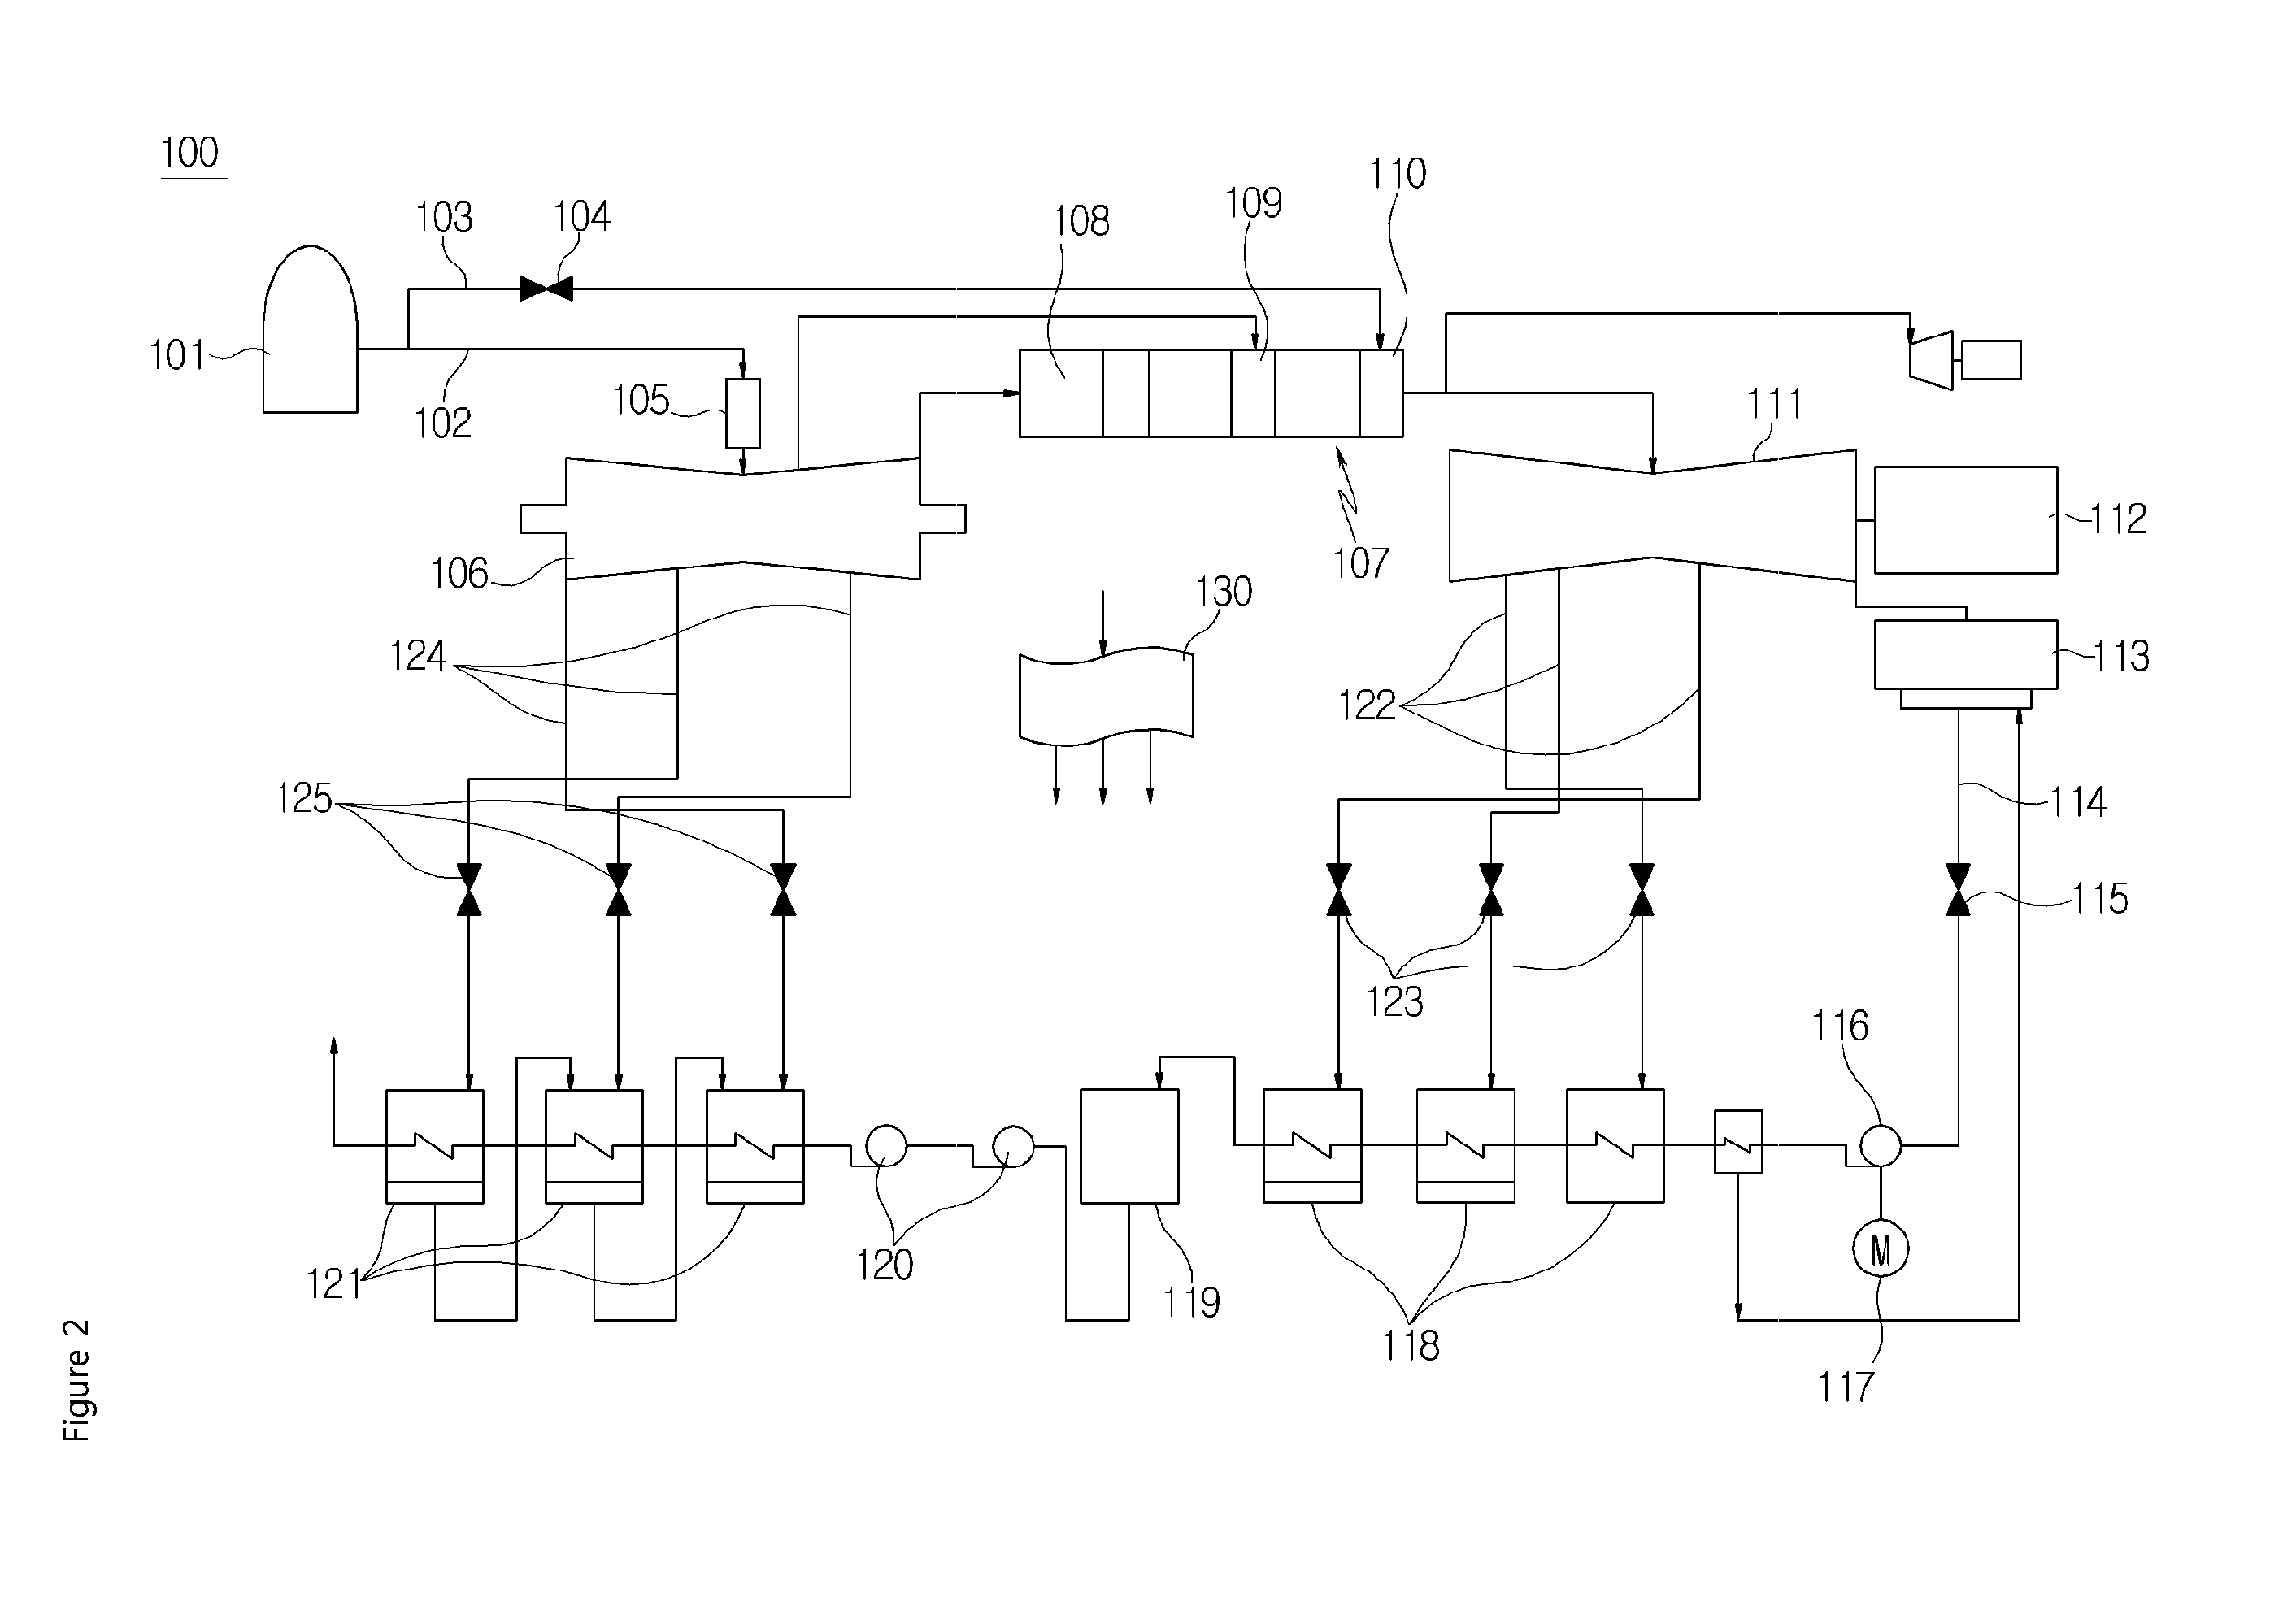 Apparatus and method for reactor power control of steam turbine power generation system